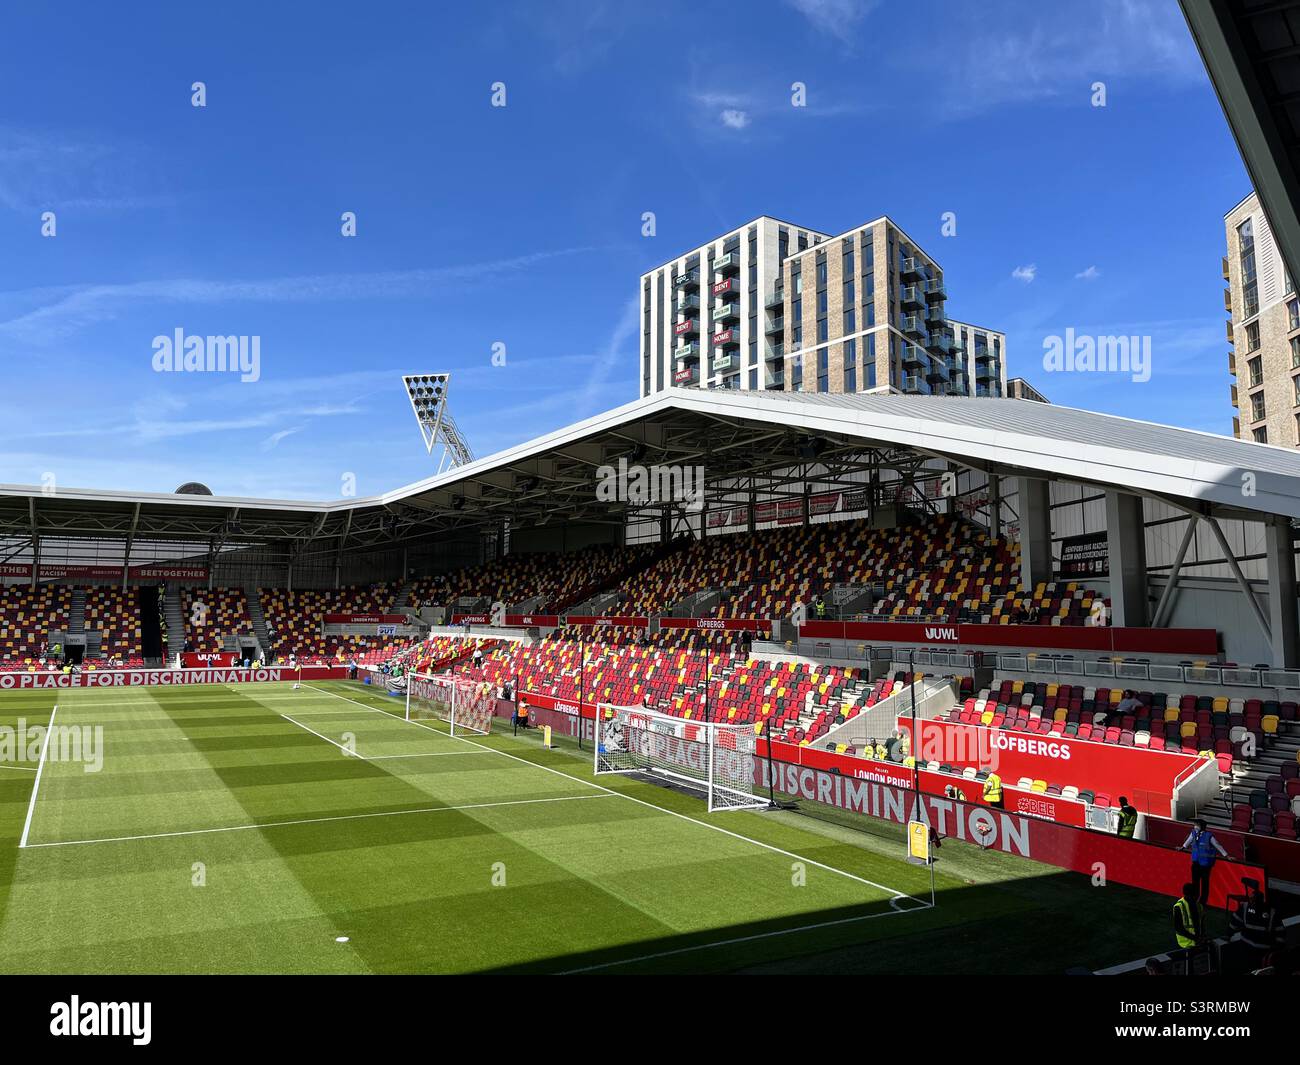 A general view of Brentford Community football stadium in west London. Brentford FC currently play in the English Premier League. Constructed in 2020, the stadium has a capacity of 17,250 people. Stock Photo